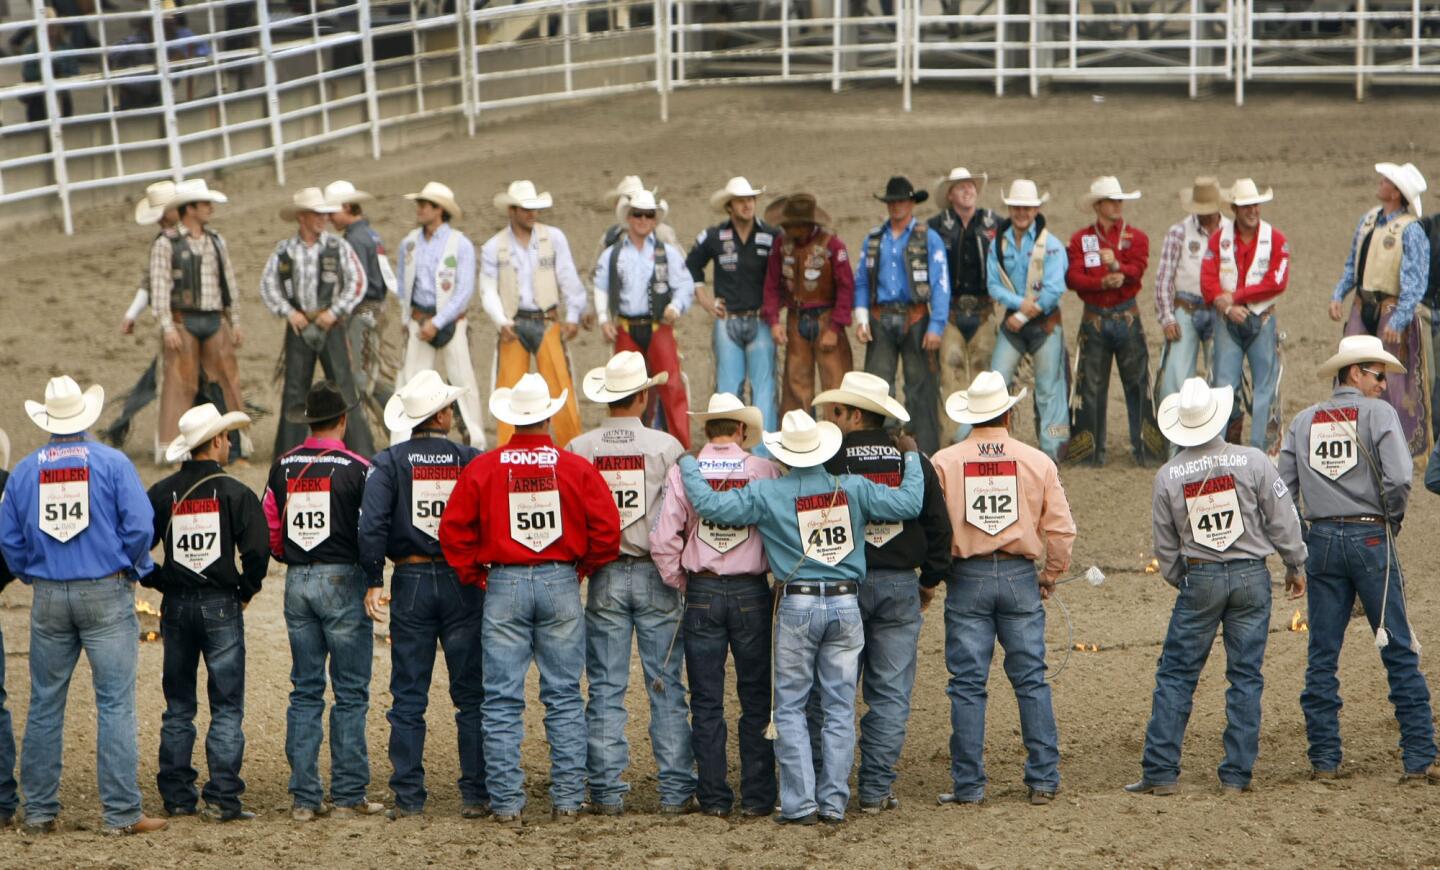 There is a sport they do in Canada besides hockey and curling and hockey and football and hockey and skiing: rodeo. These competitors were part of the 2013 Calgary Stampede rodeo.